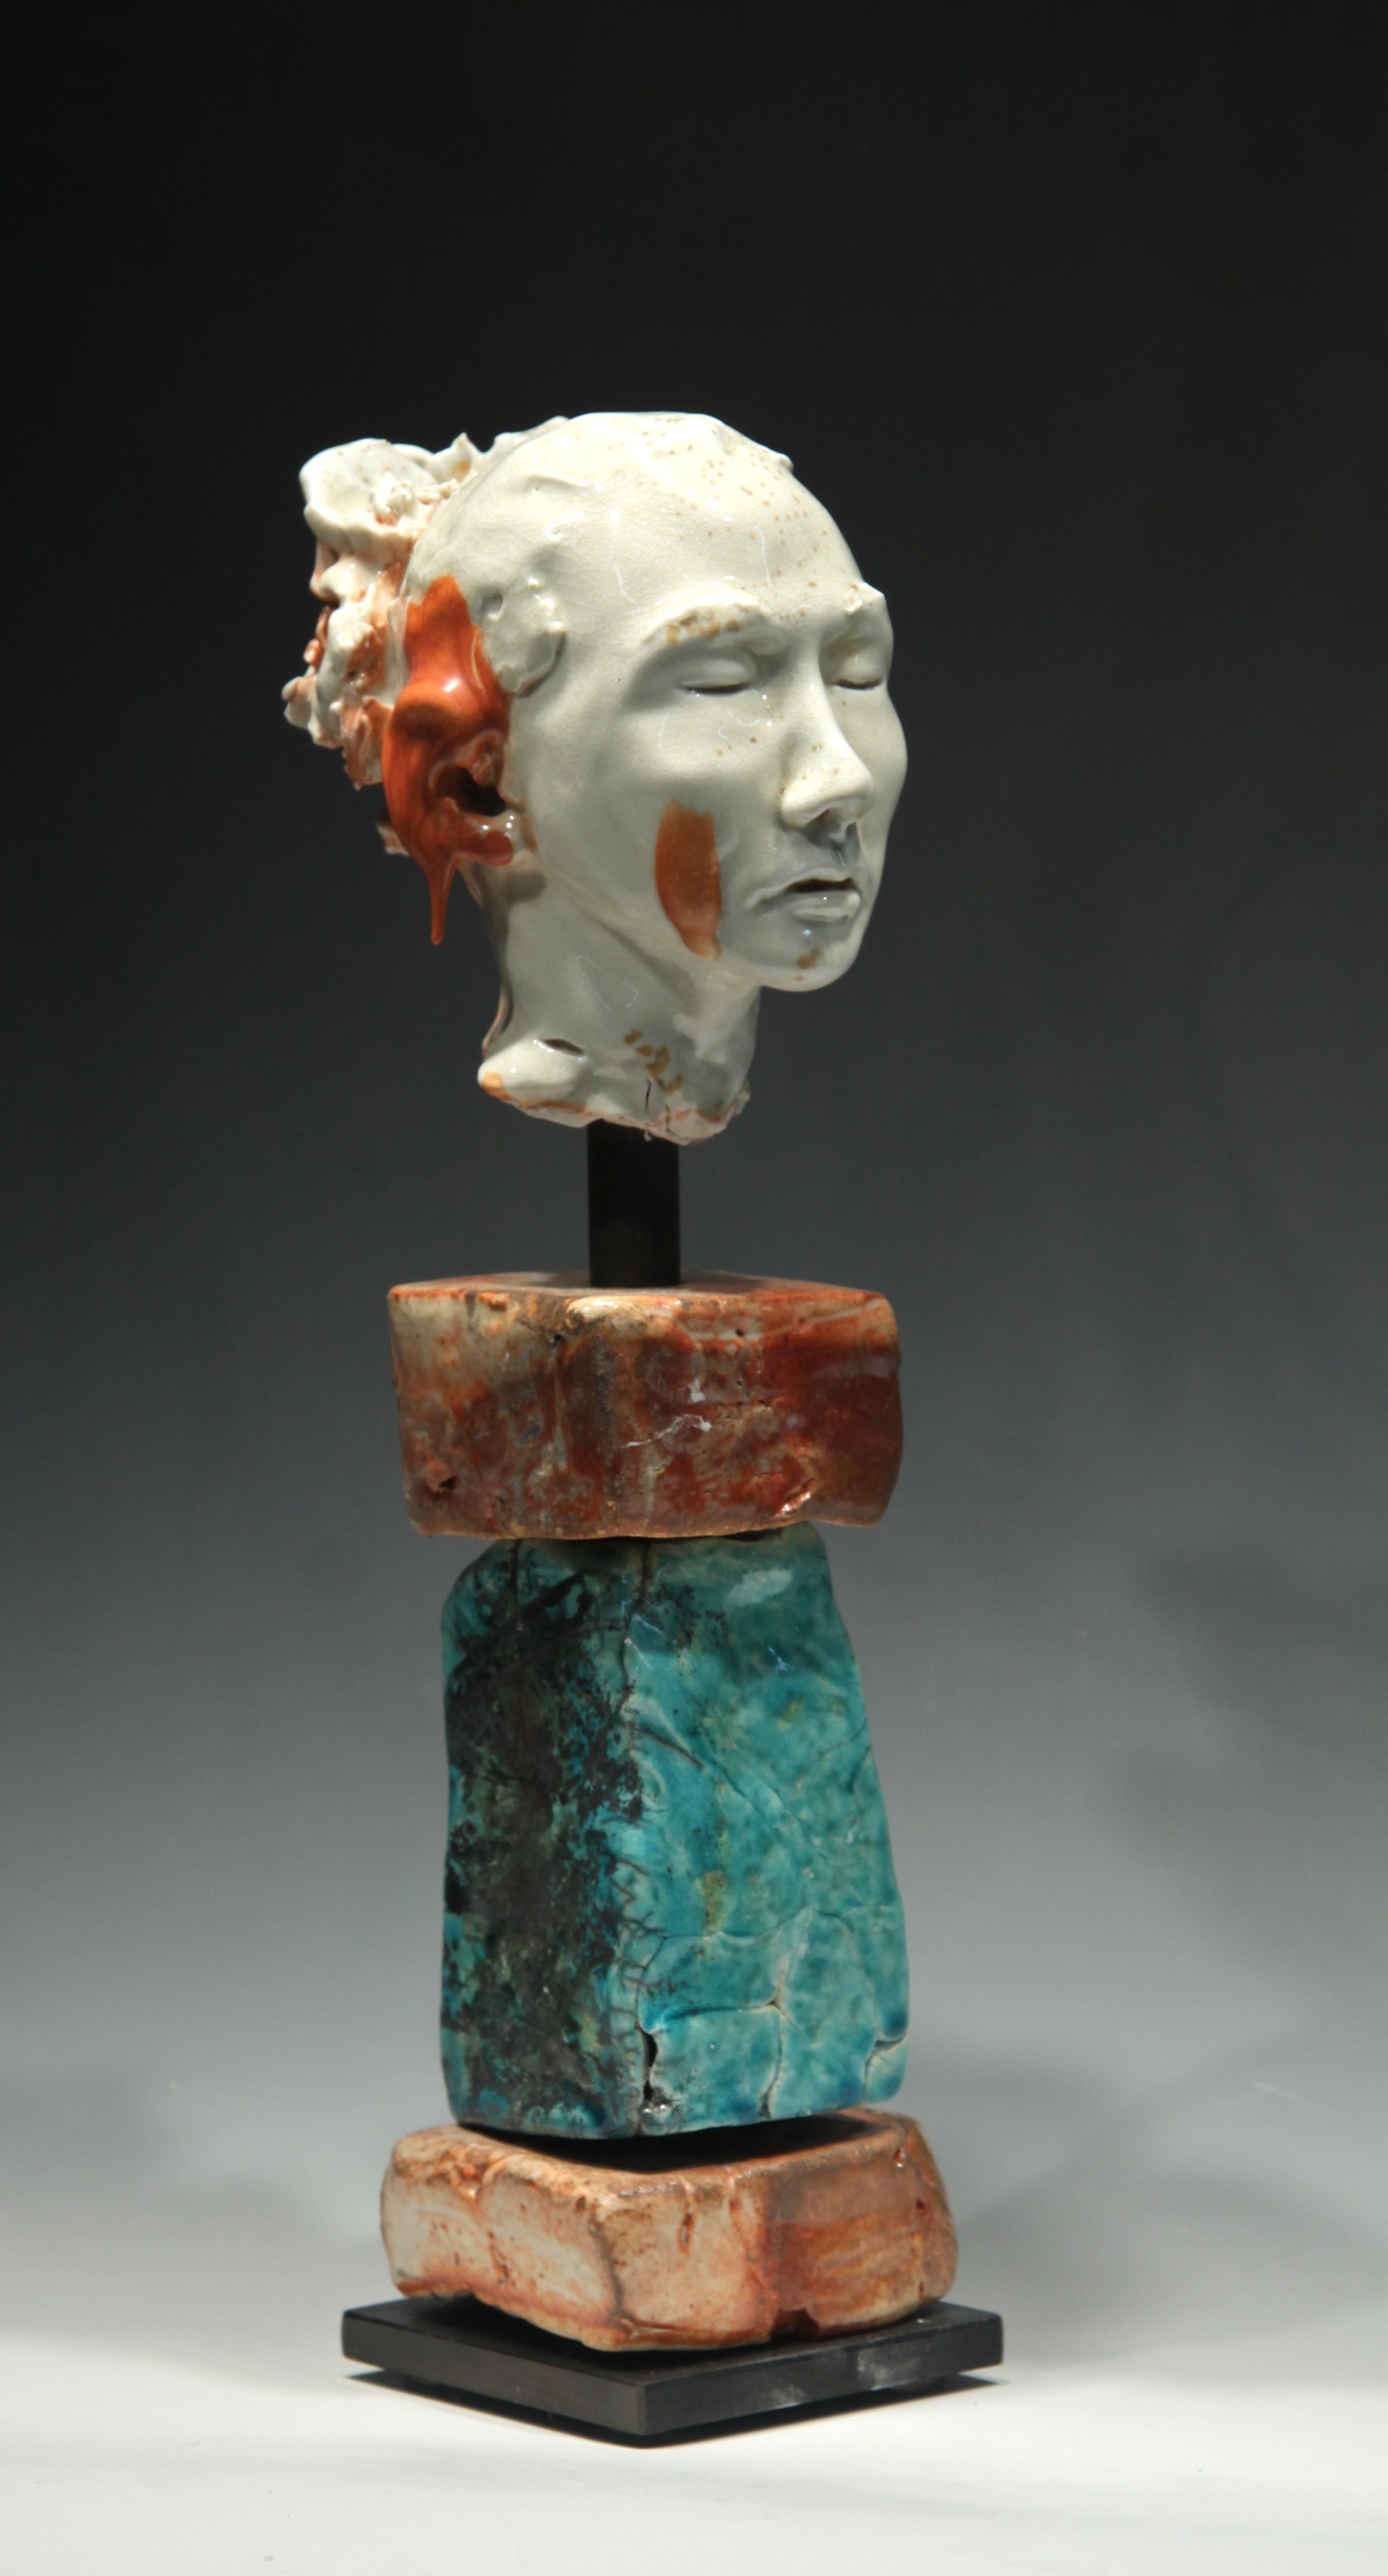  Woman's Head with Red Drip on Ear, noborigama-fired porcelain.&nbsp; Head Sculpture 